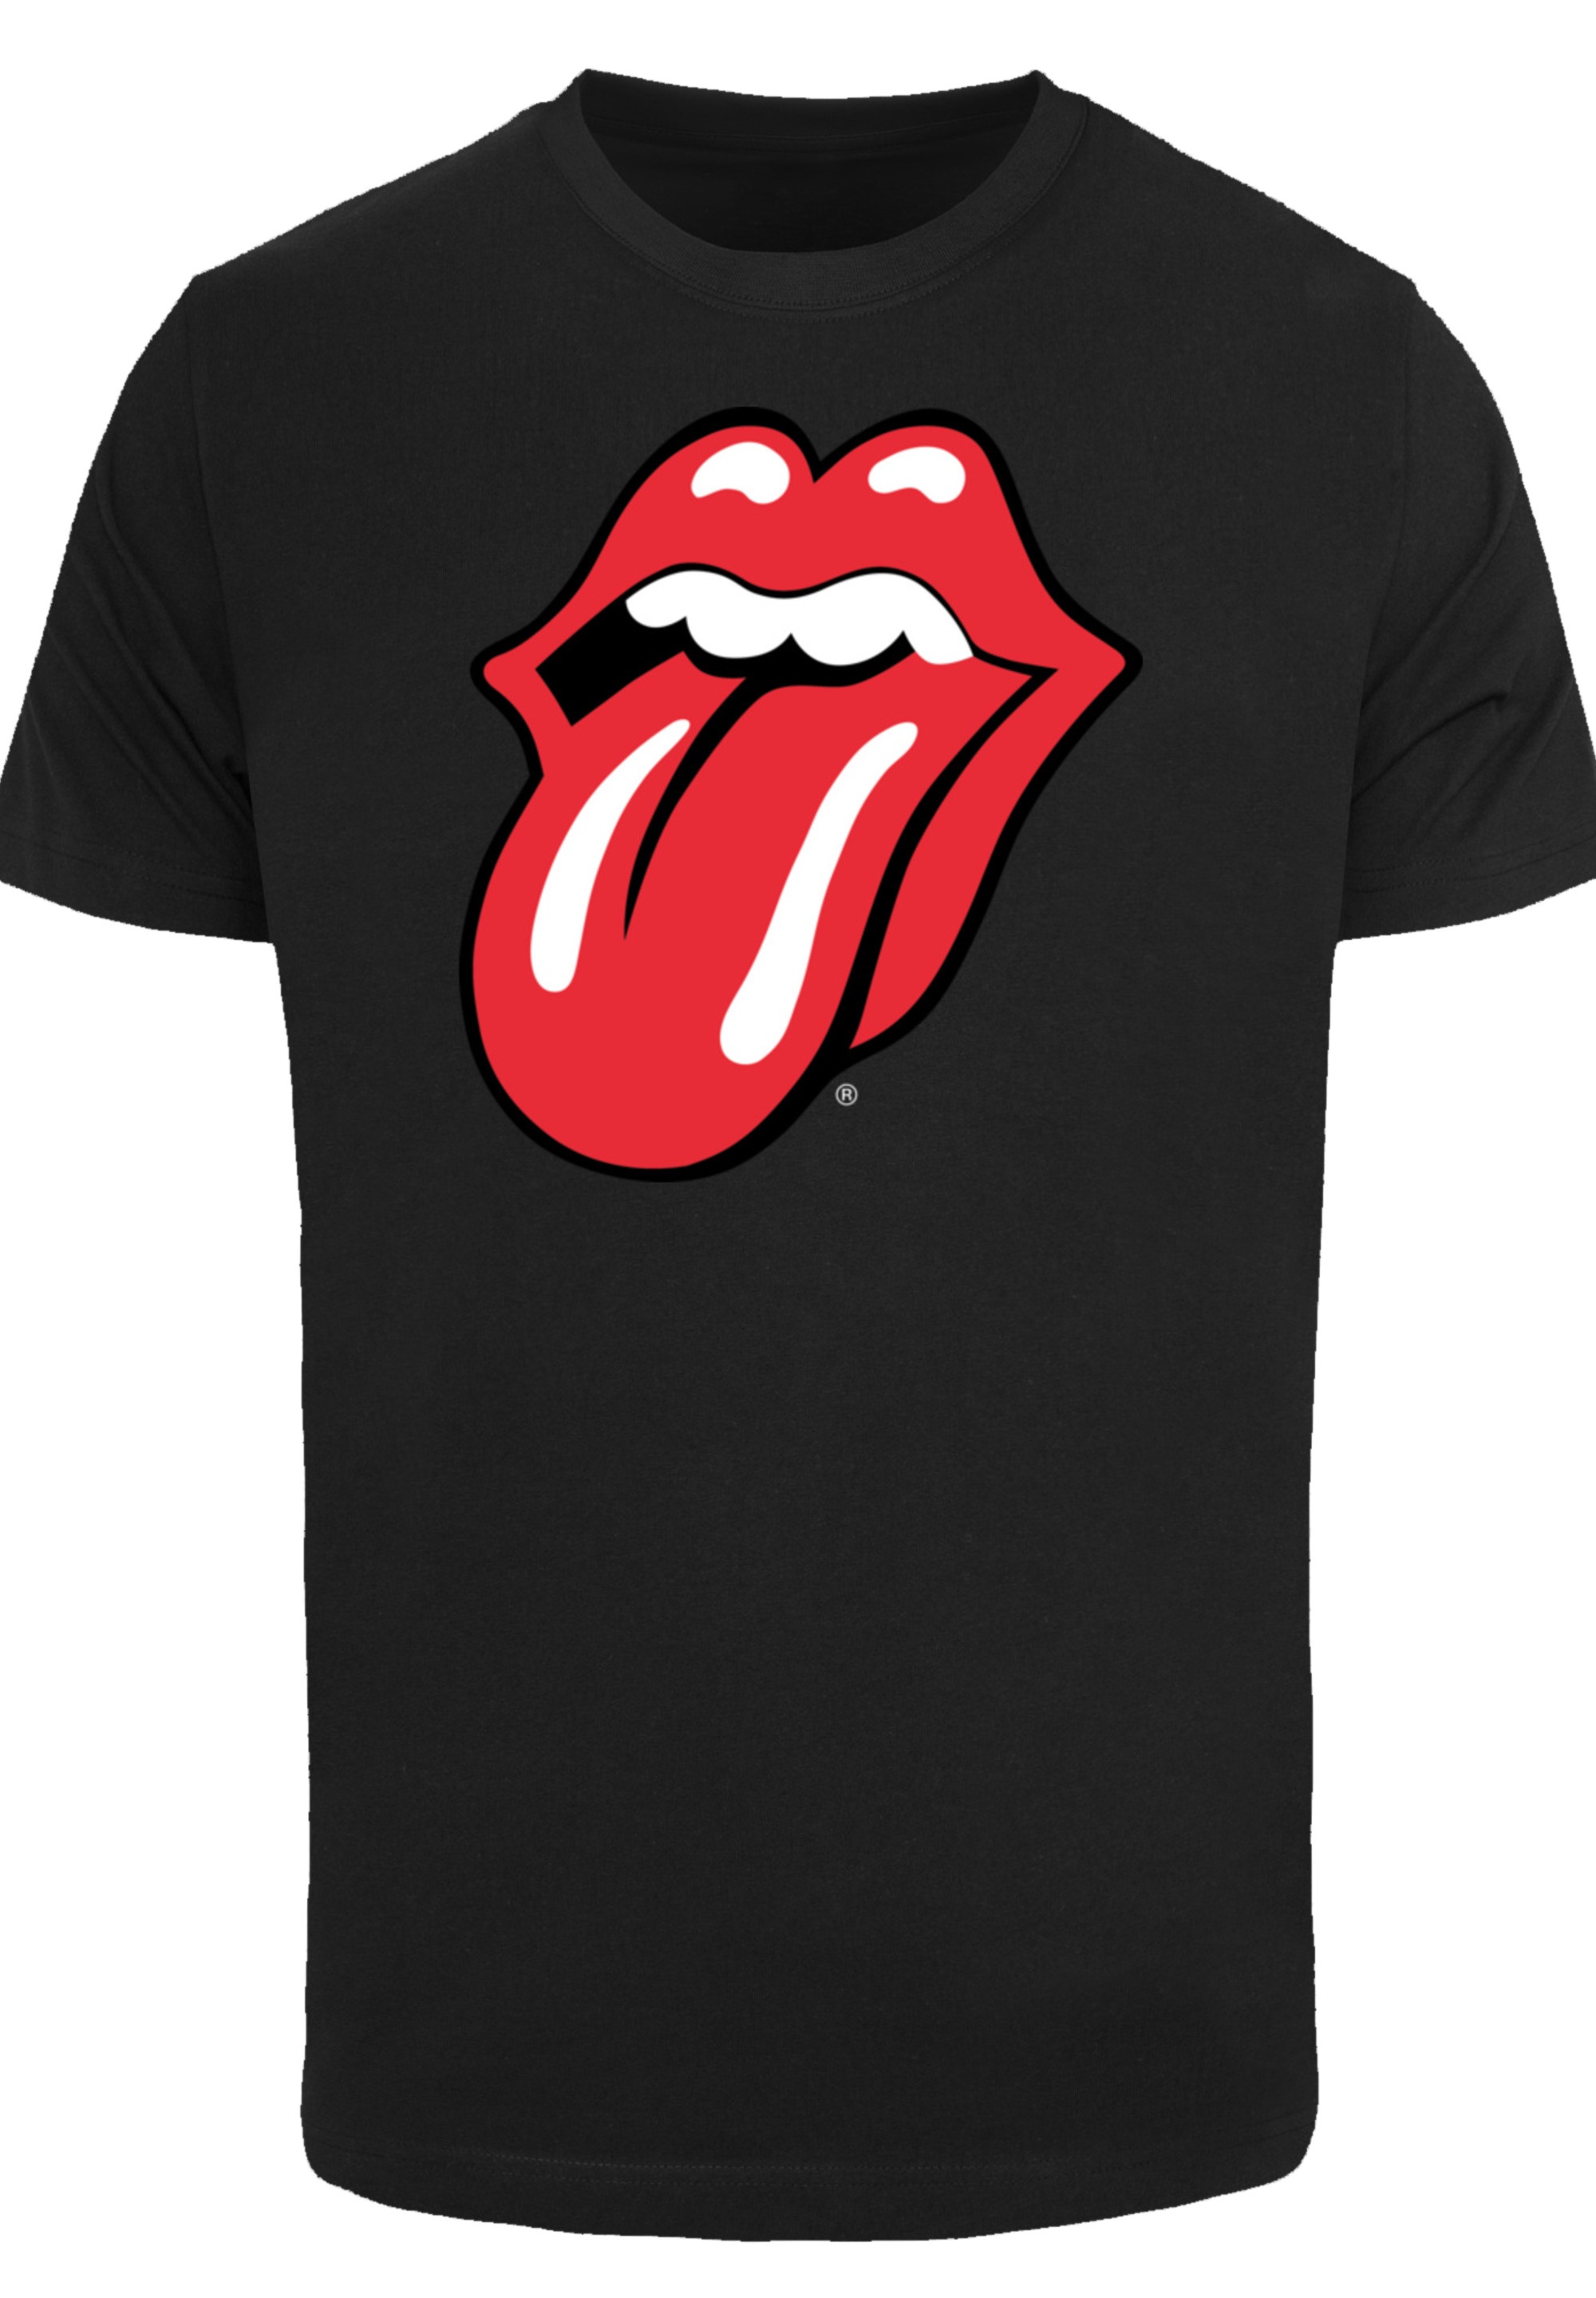 F4NT4STIC T-Shirt »The Rolling kaufen | ▷ Zunge«, BAUR Print Stones Rote